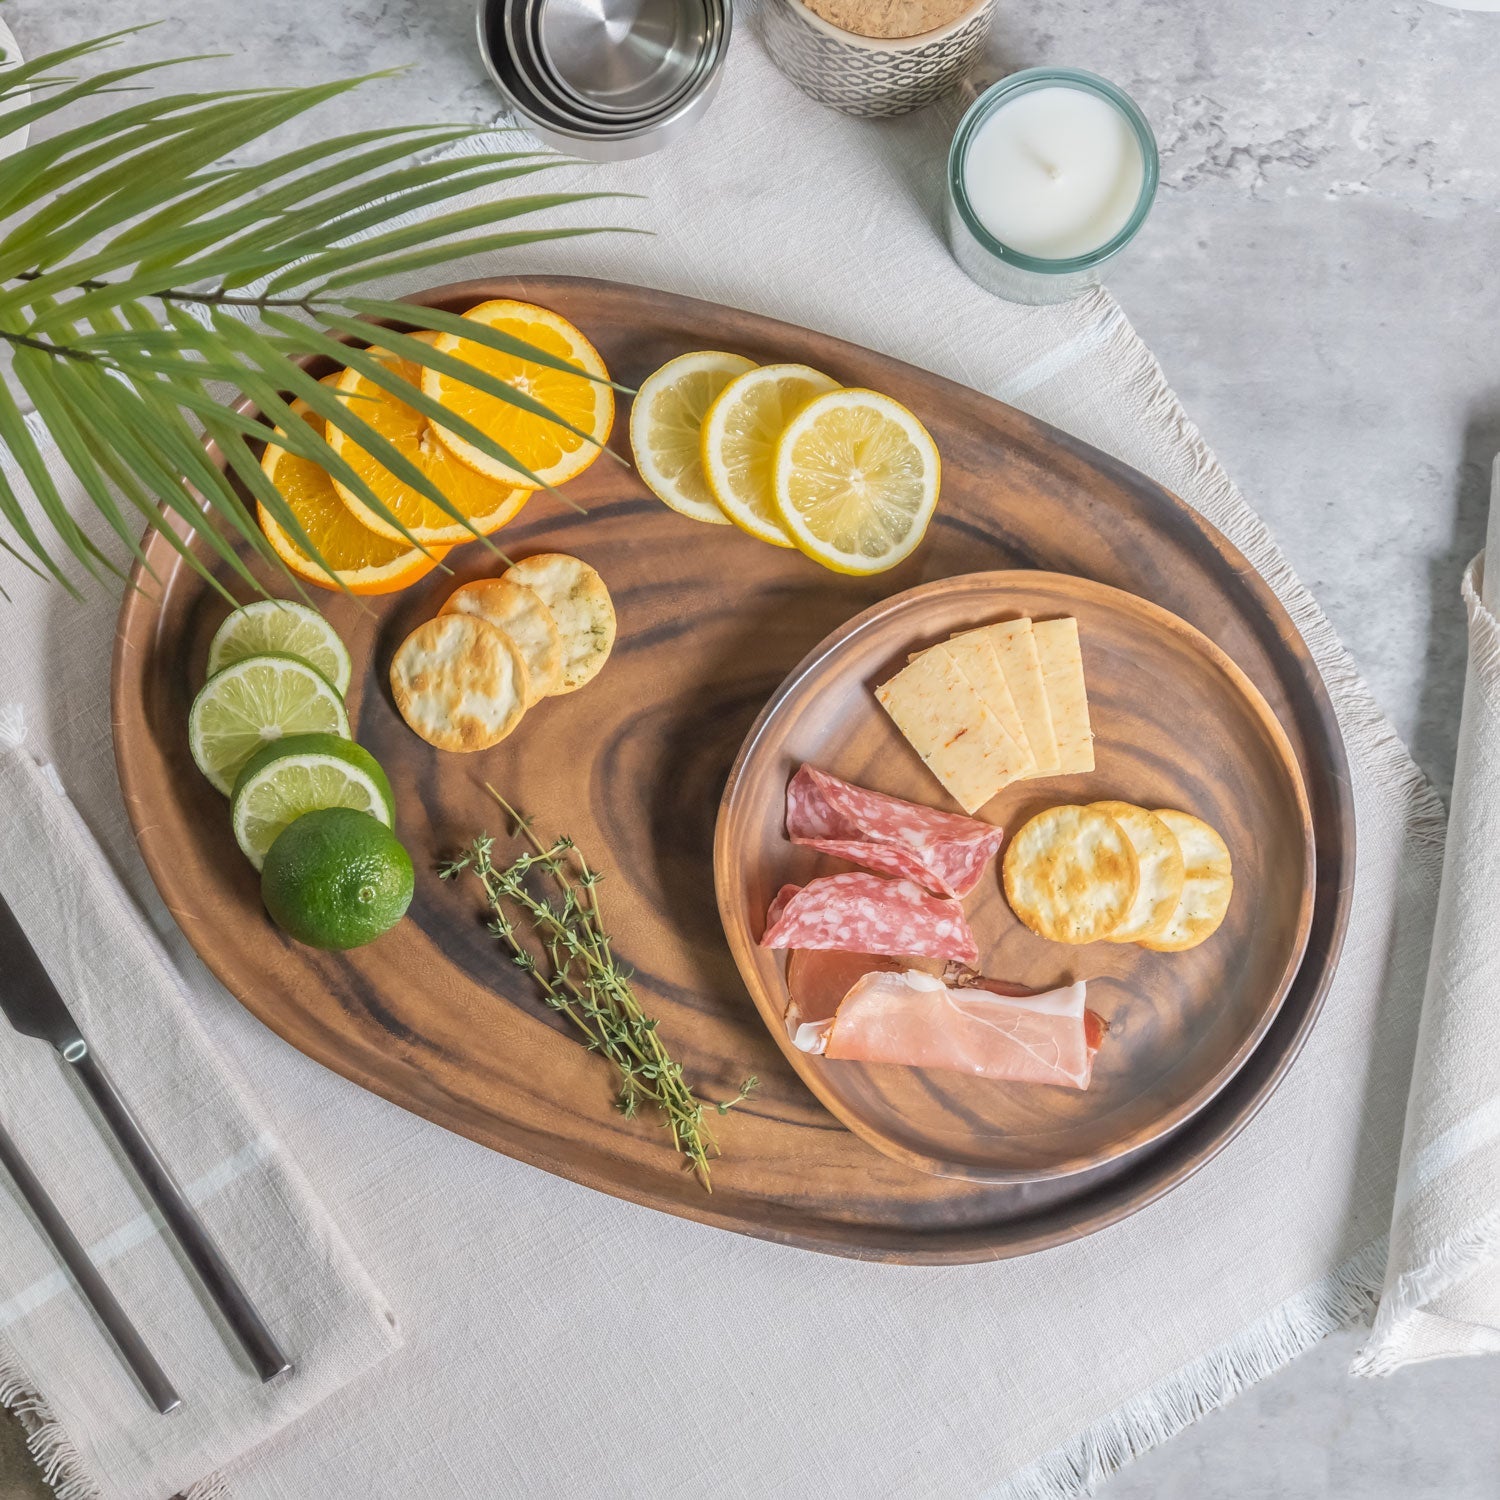 Melamine Wood Serving Tray: Merritt Designs Sequoia 17-inch Tray with select appetizers